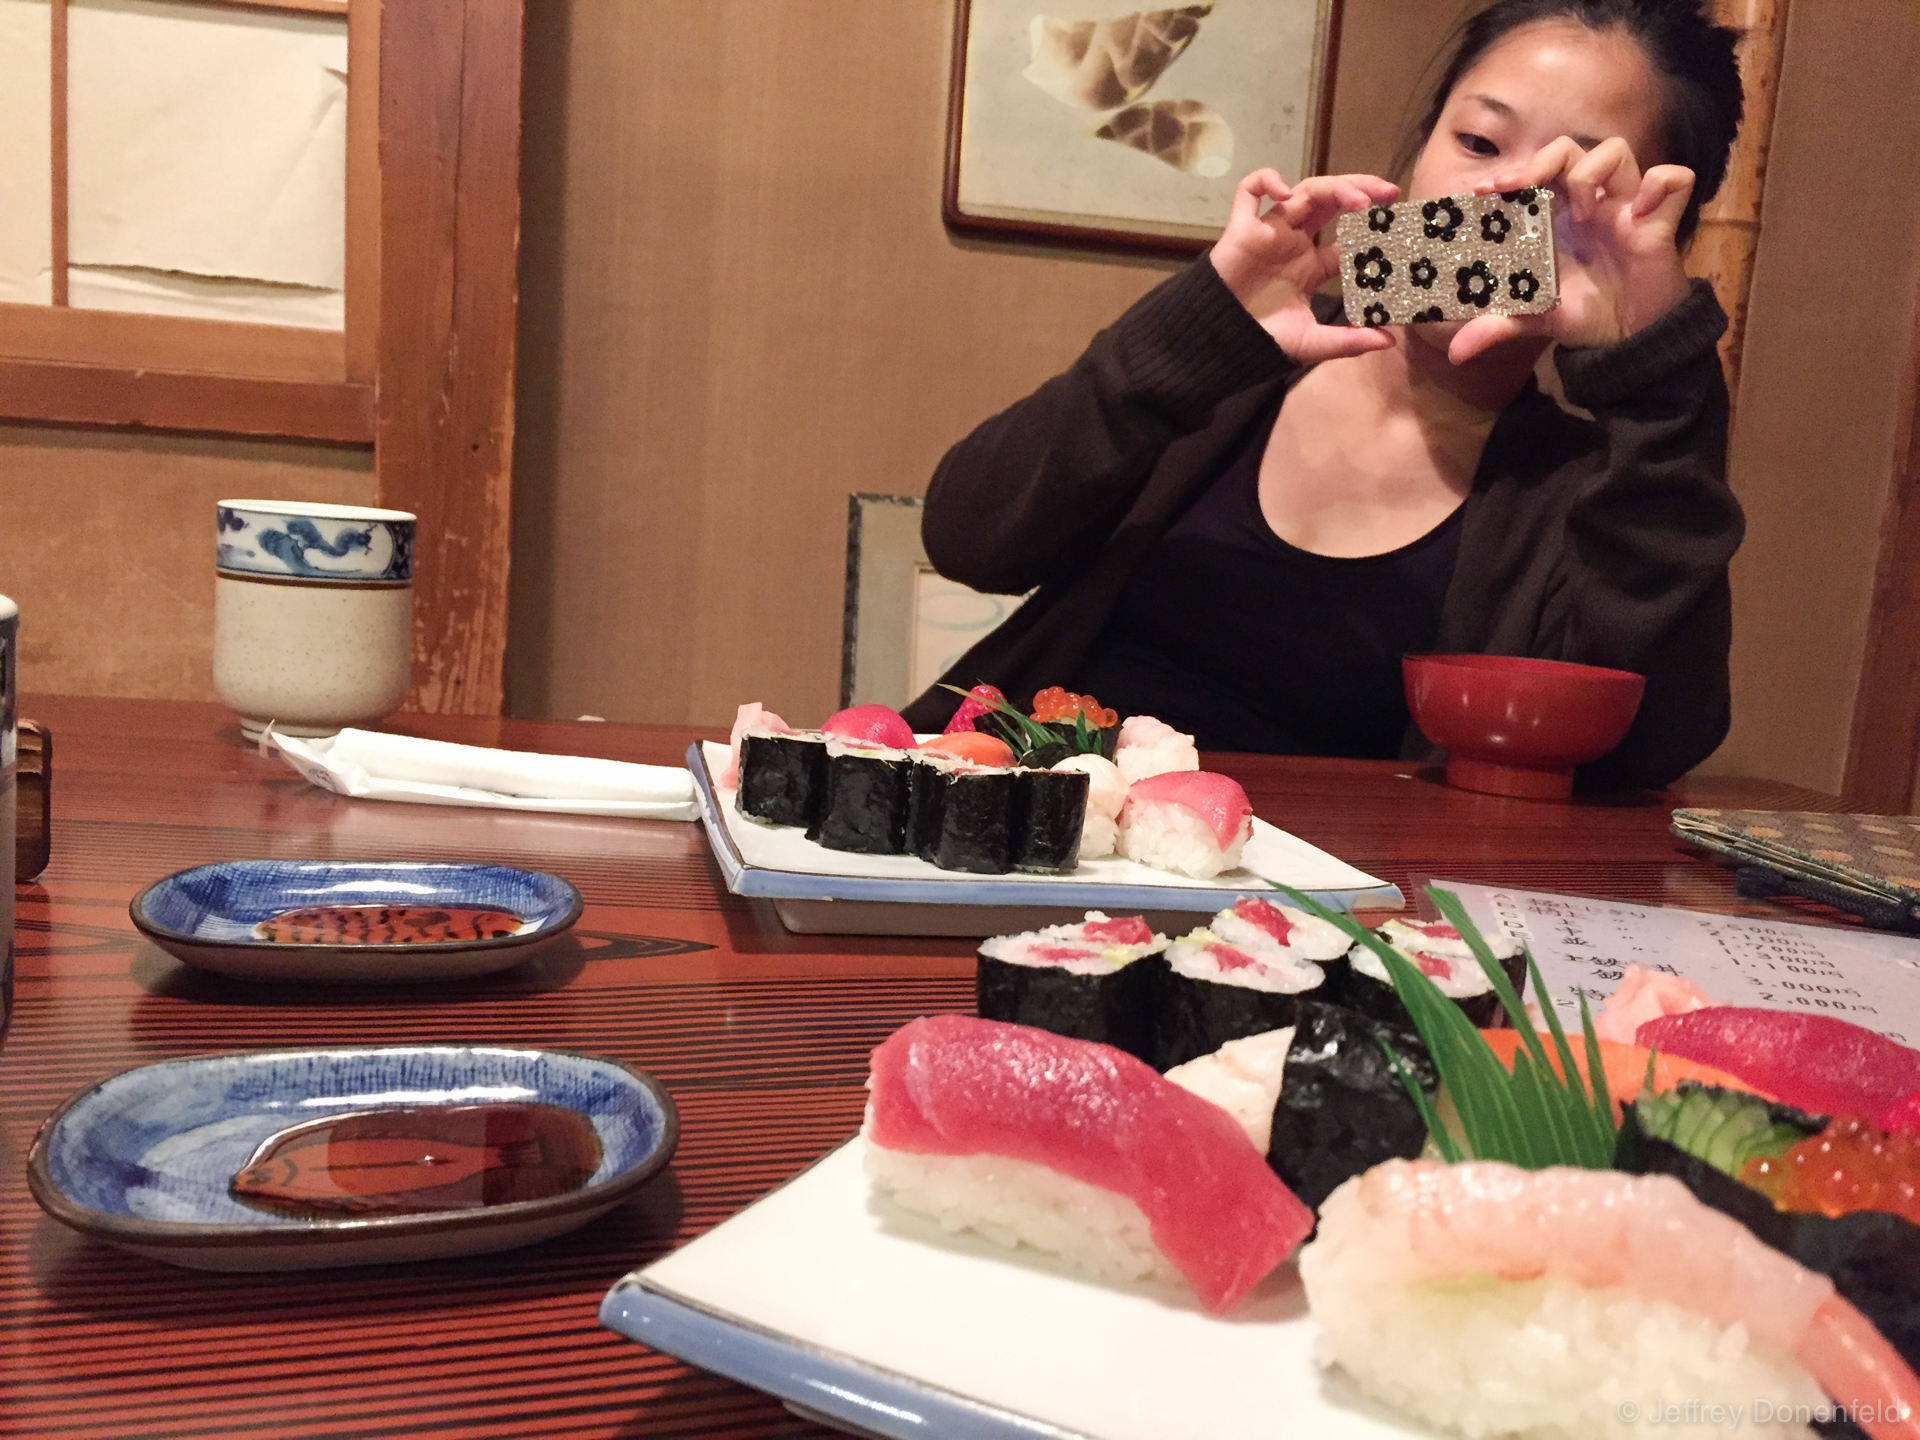 After a long day of snow monkeying and onsening, we of course needed a sushi dinner.